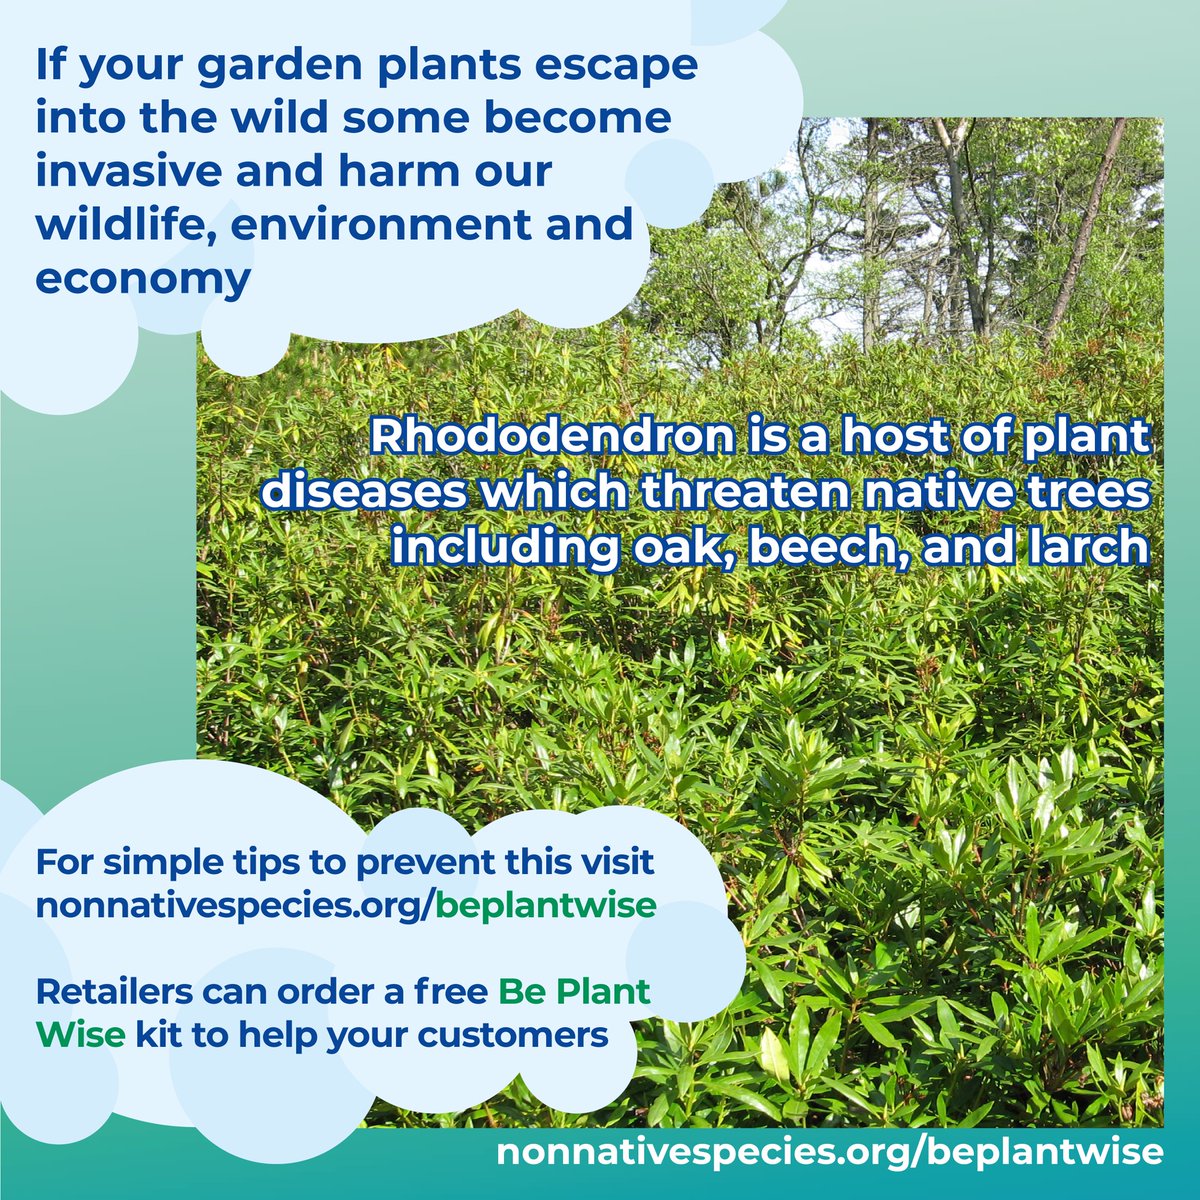 #InvasivePlants like Rhododendron can: - cause devastating environmental impacts🌍 - be extremely costly to control 💰 - interfere with our health and way of life ❌ #BePlantWise and dispose of your garden waste responsibly to prevent their spread nonnativespecies.org/beplantwise